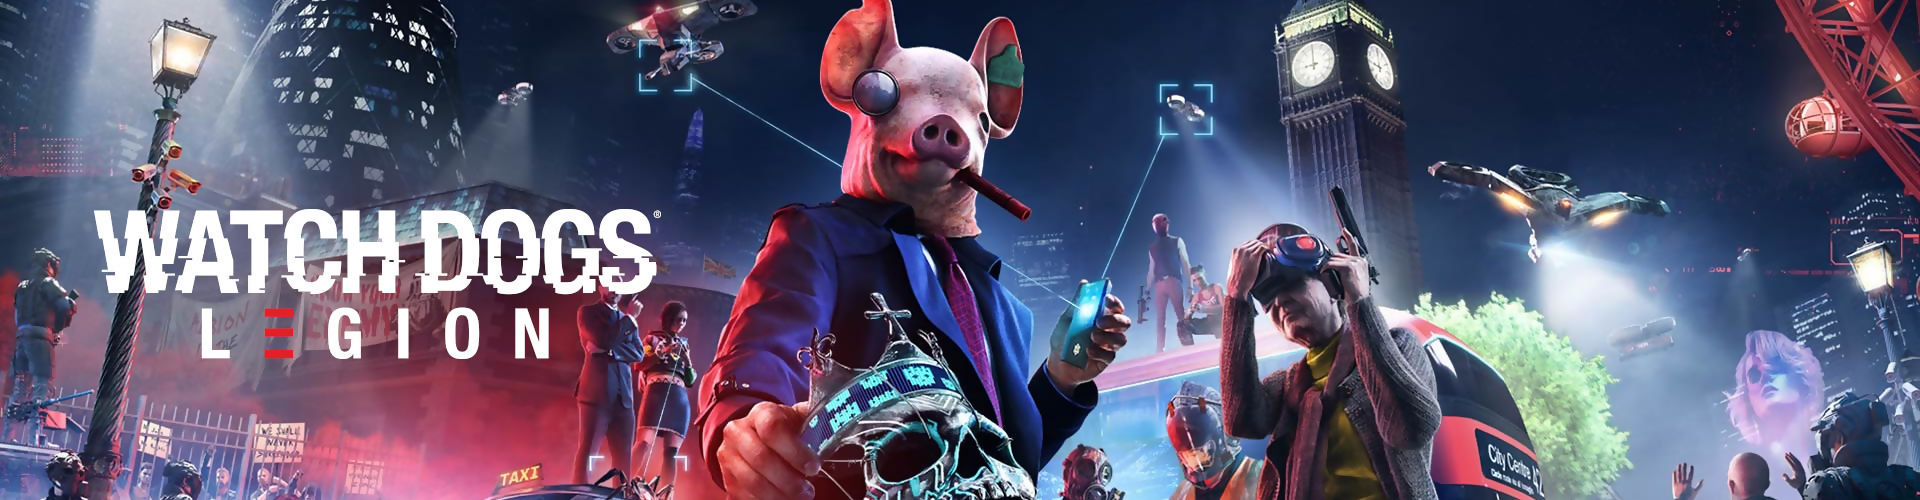 Check out the average score of Watch Dogs Legion